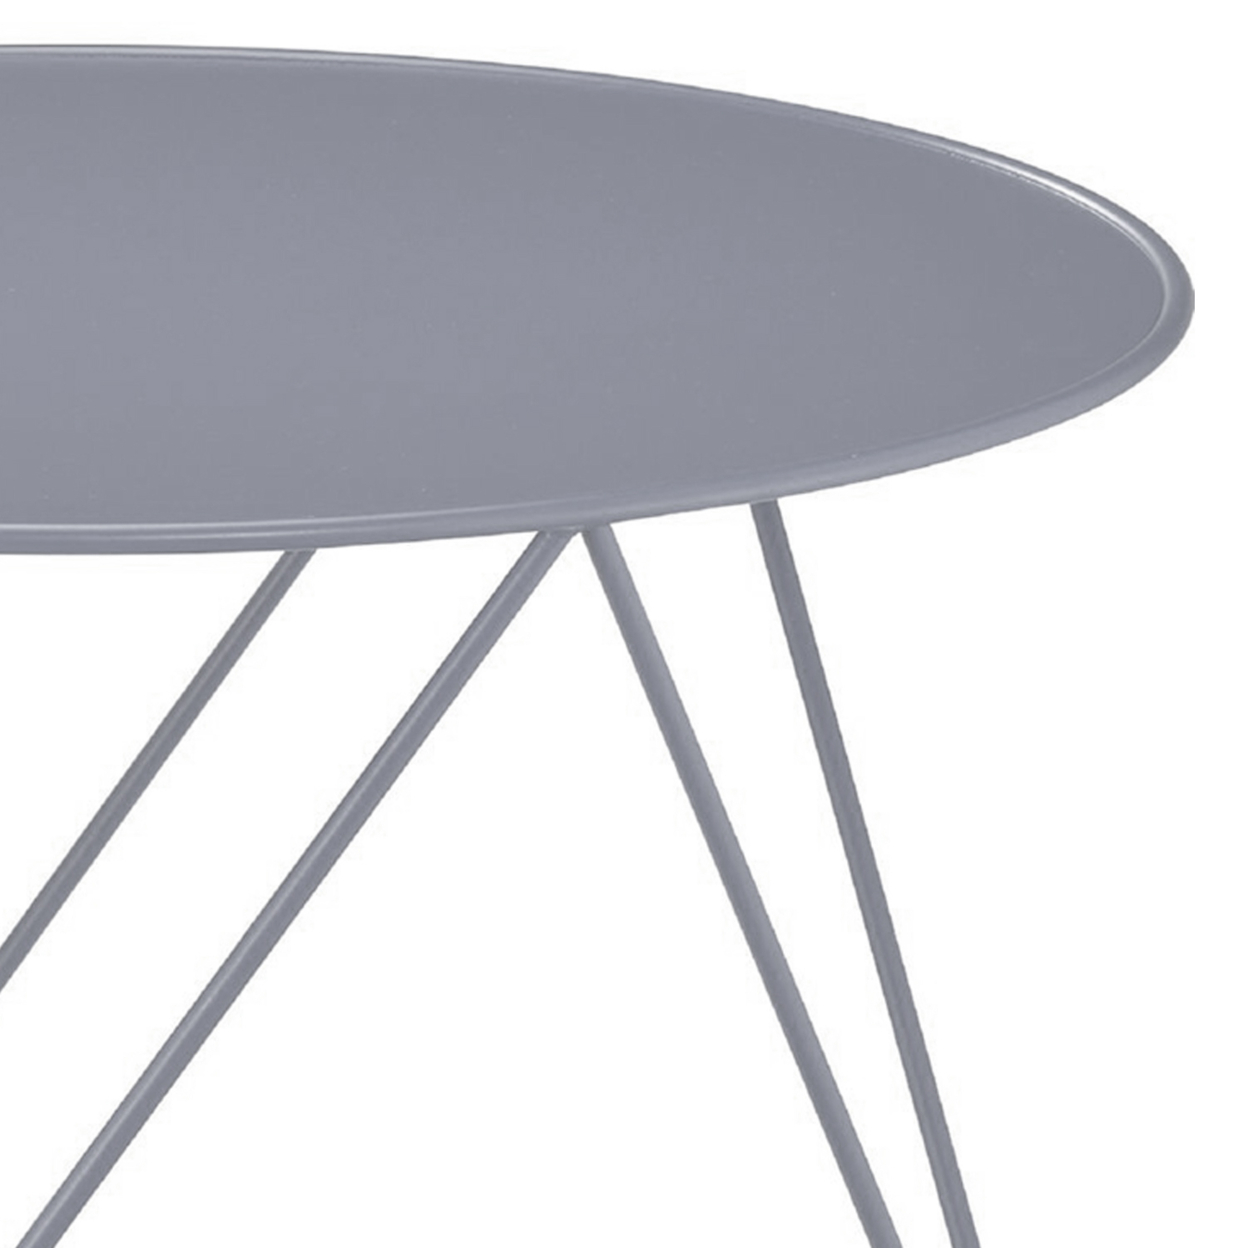 Accent Table With Open Geometric Base And Round Top, Gray- Saltoro Sherpi